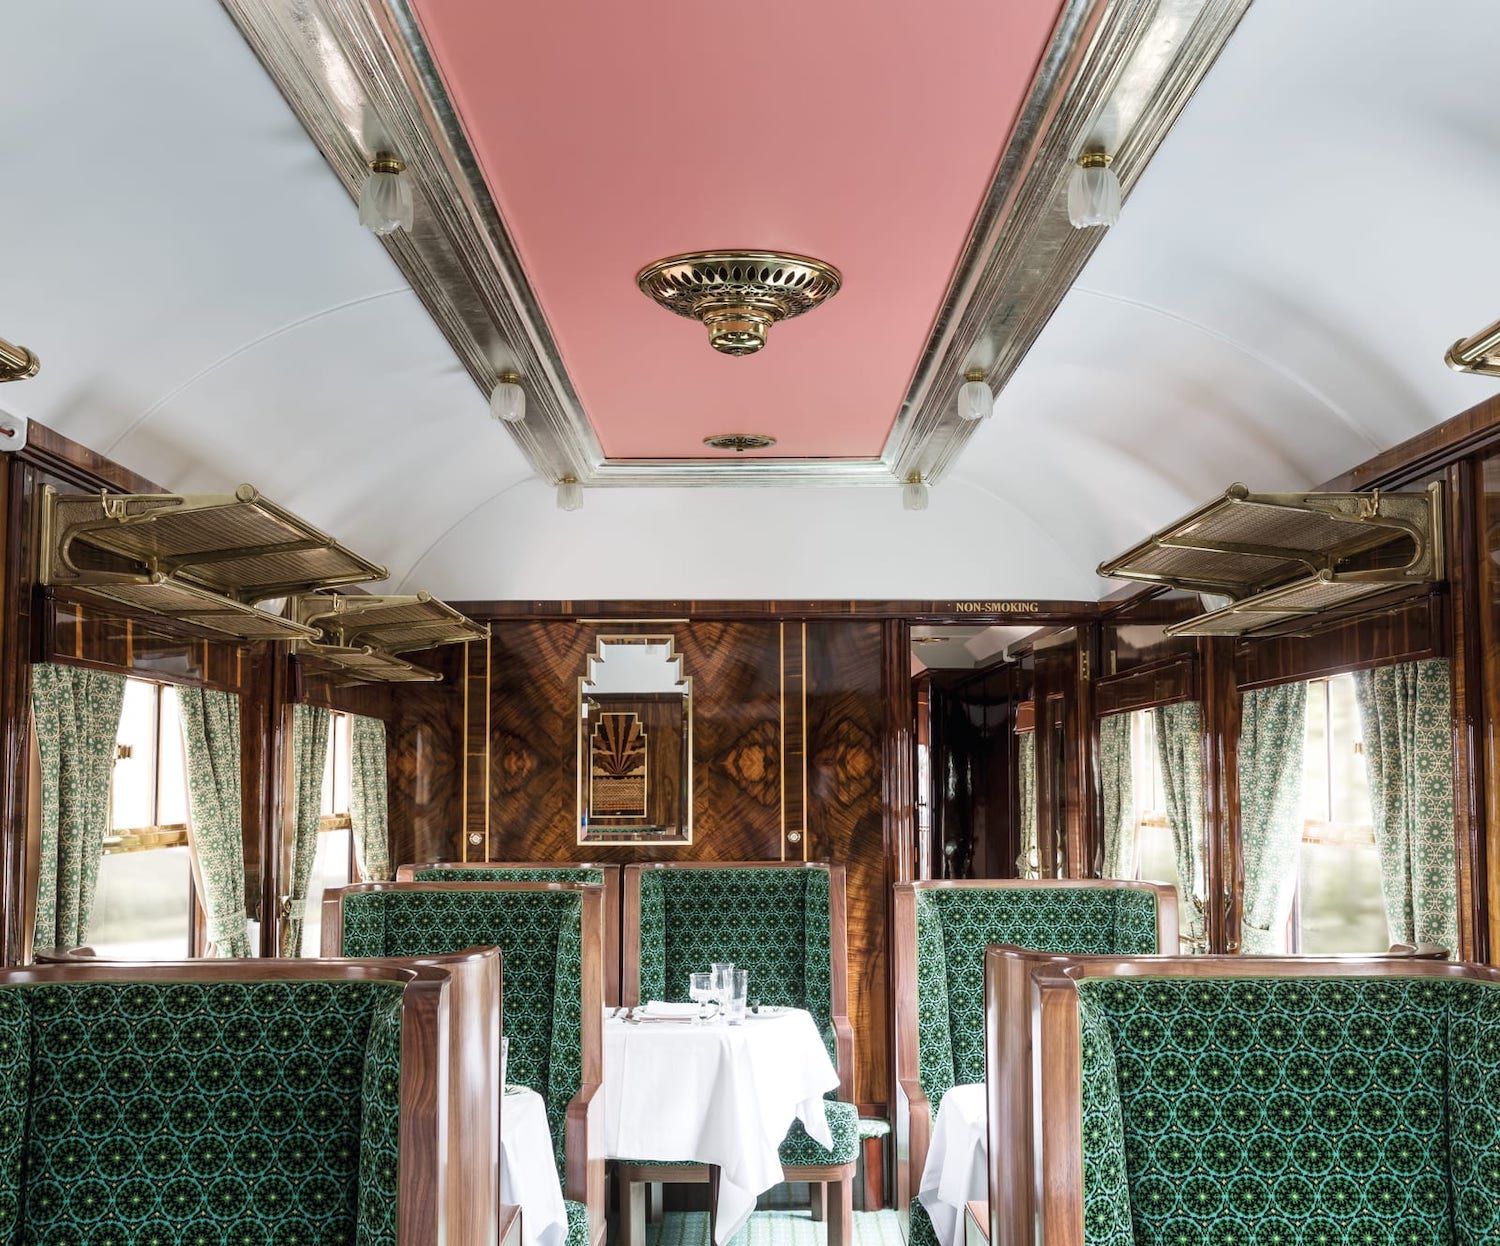 Train carriage designed by Wes Anderson